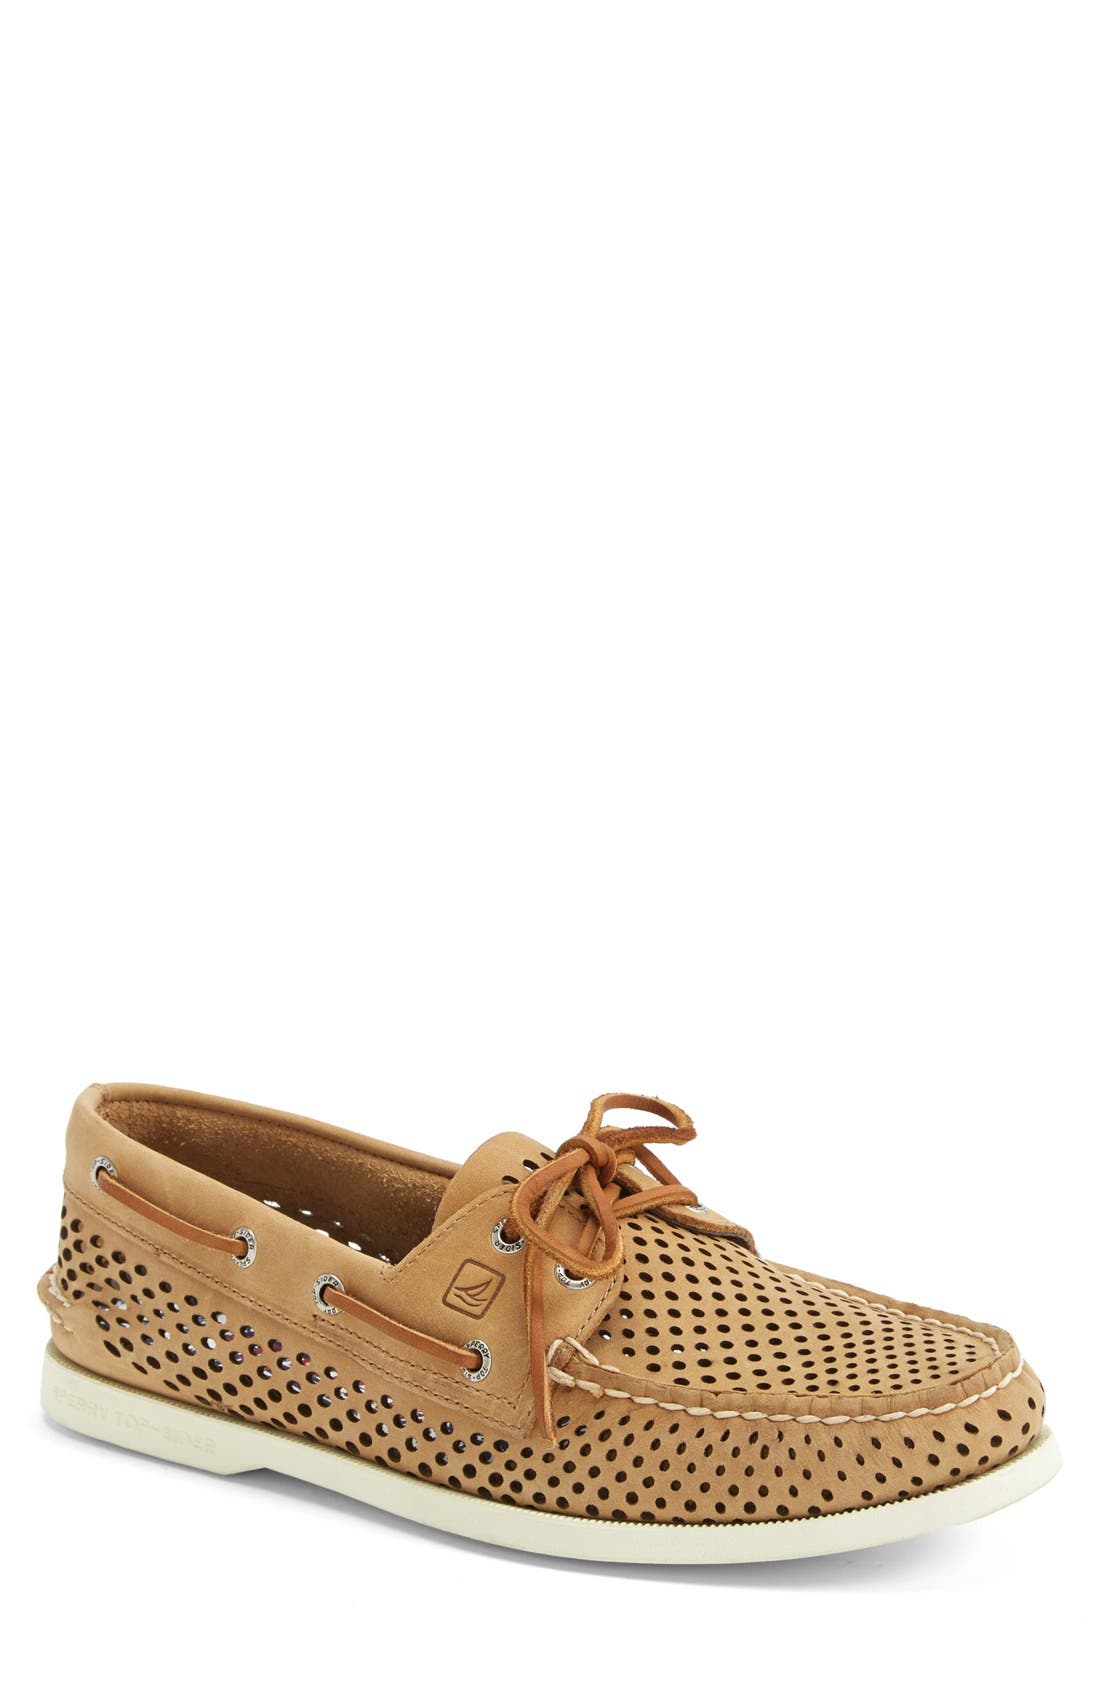 sperry perforated